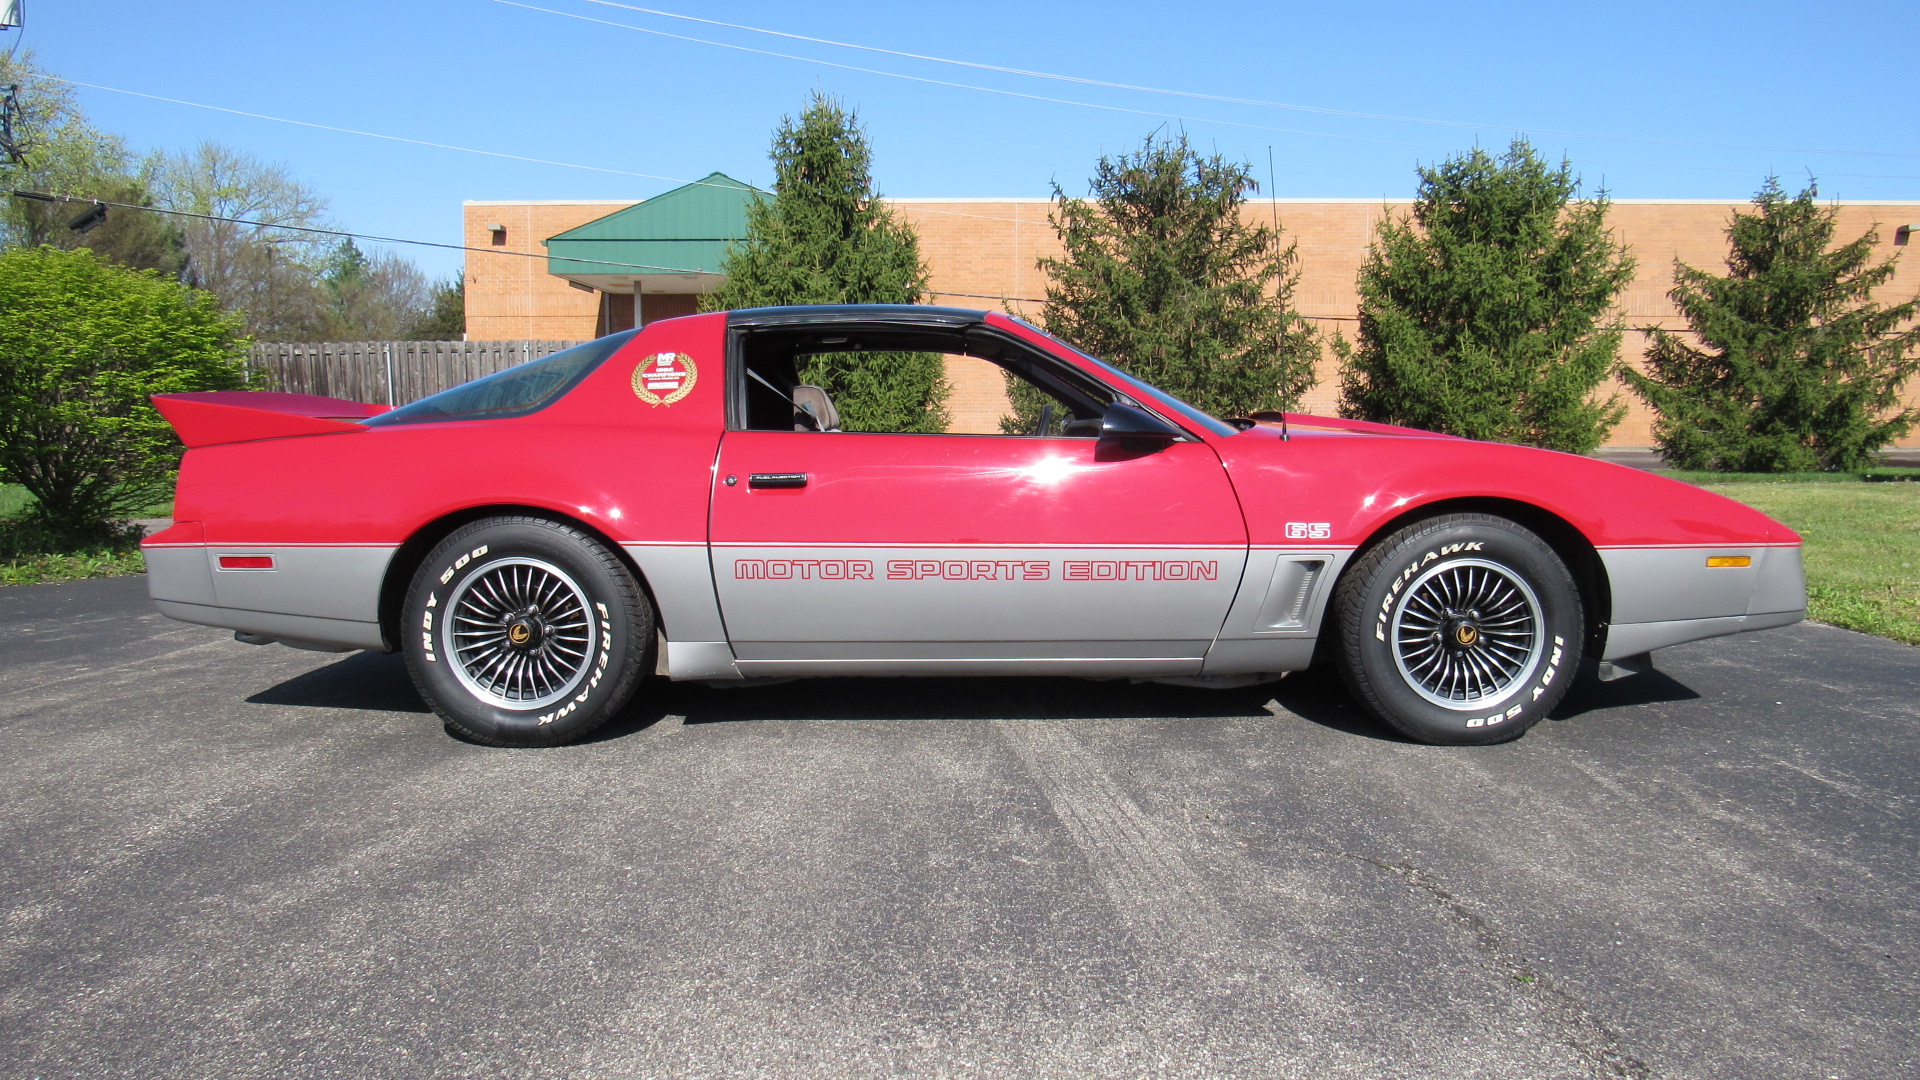 1983 Pontiac TA, MSE, 1 of 150 Made, 68K Miles, SOLD!